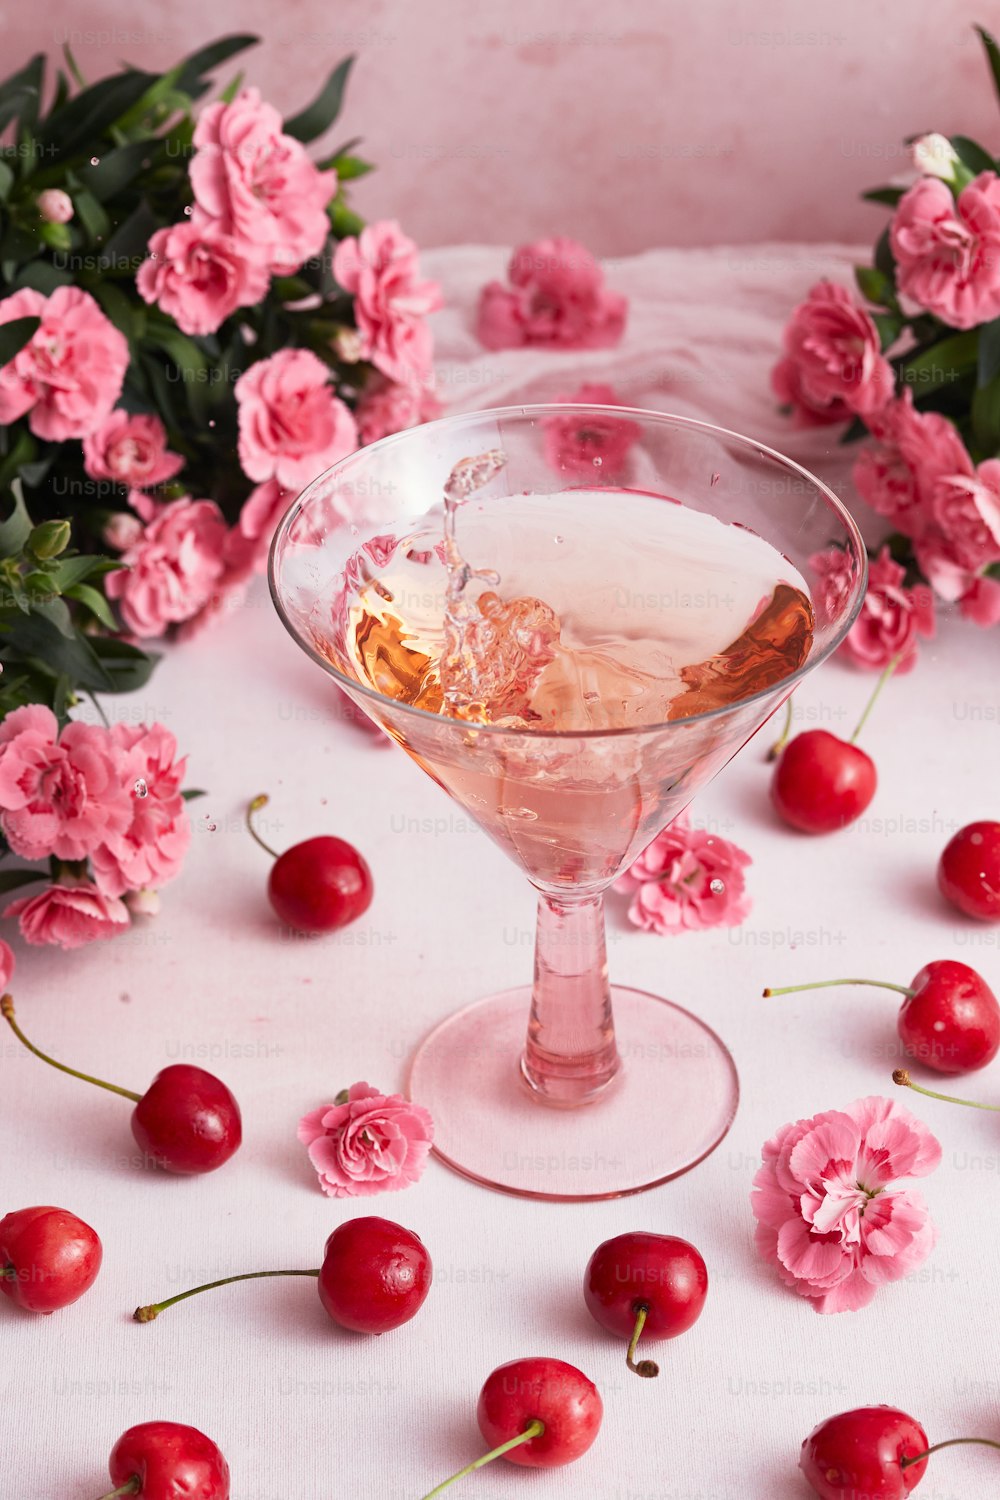 a glass filled with a liquid surrounded by flowers and cherries